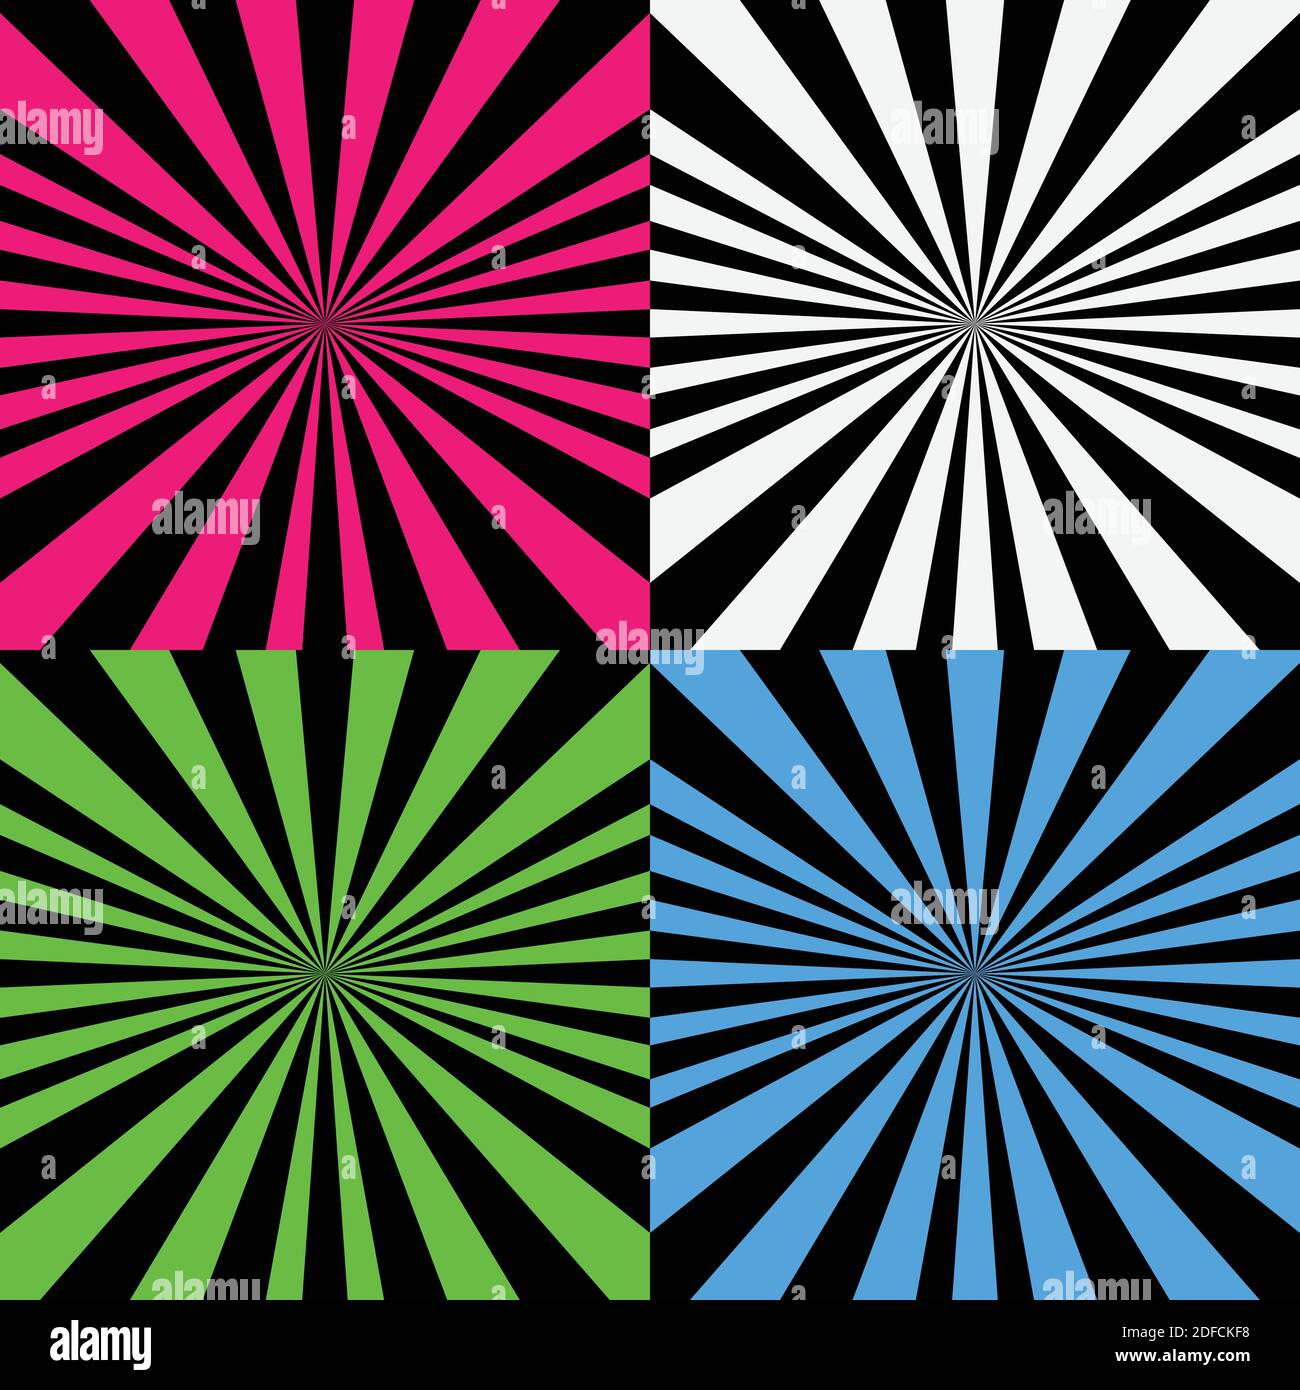 Vector illustration psychedelic spiral set with radial rays, comic effect, vortex background. Hypnotic spiral Stock Vector